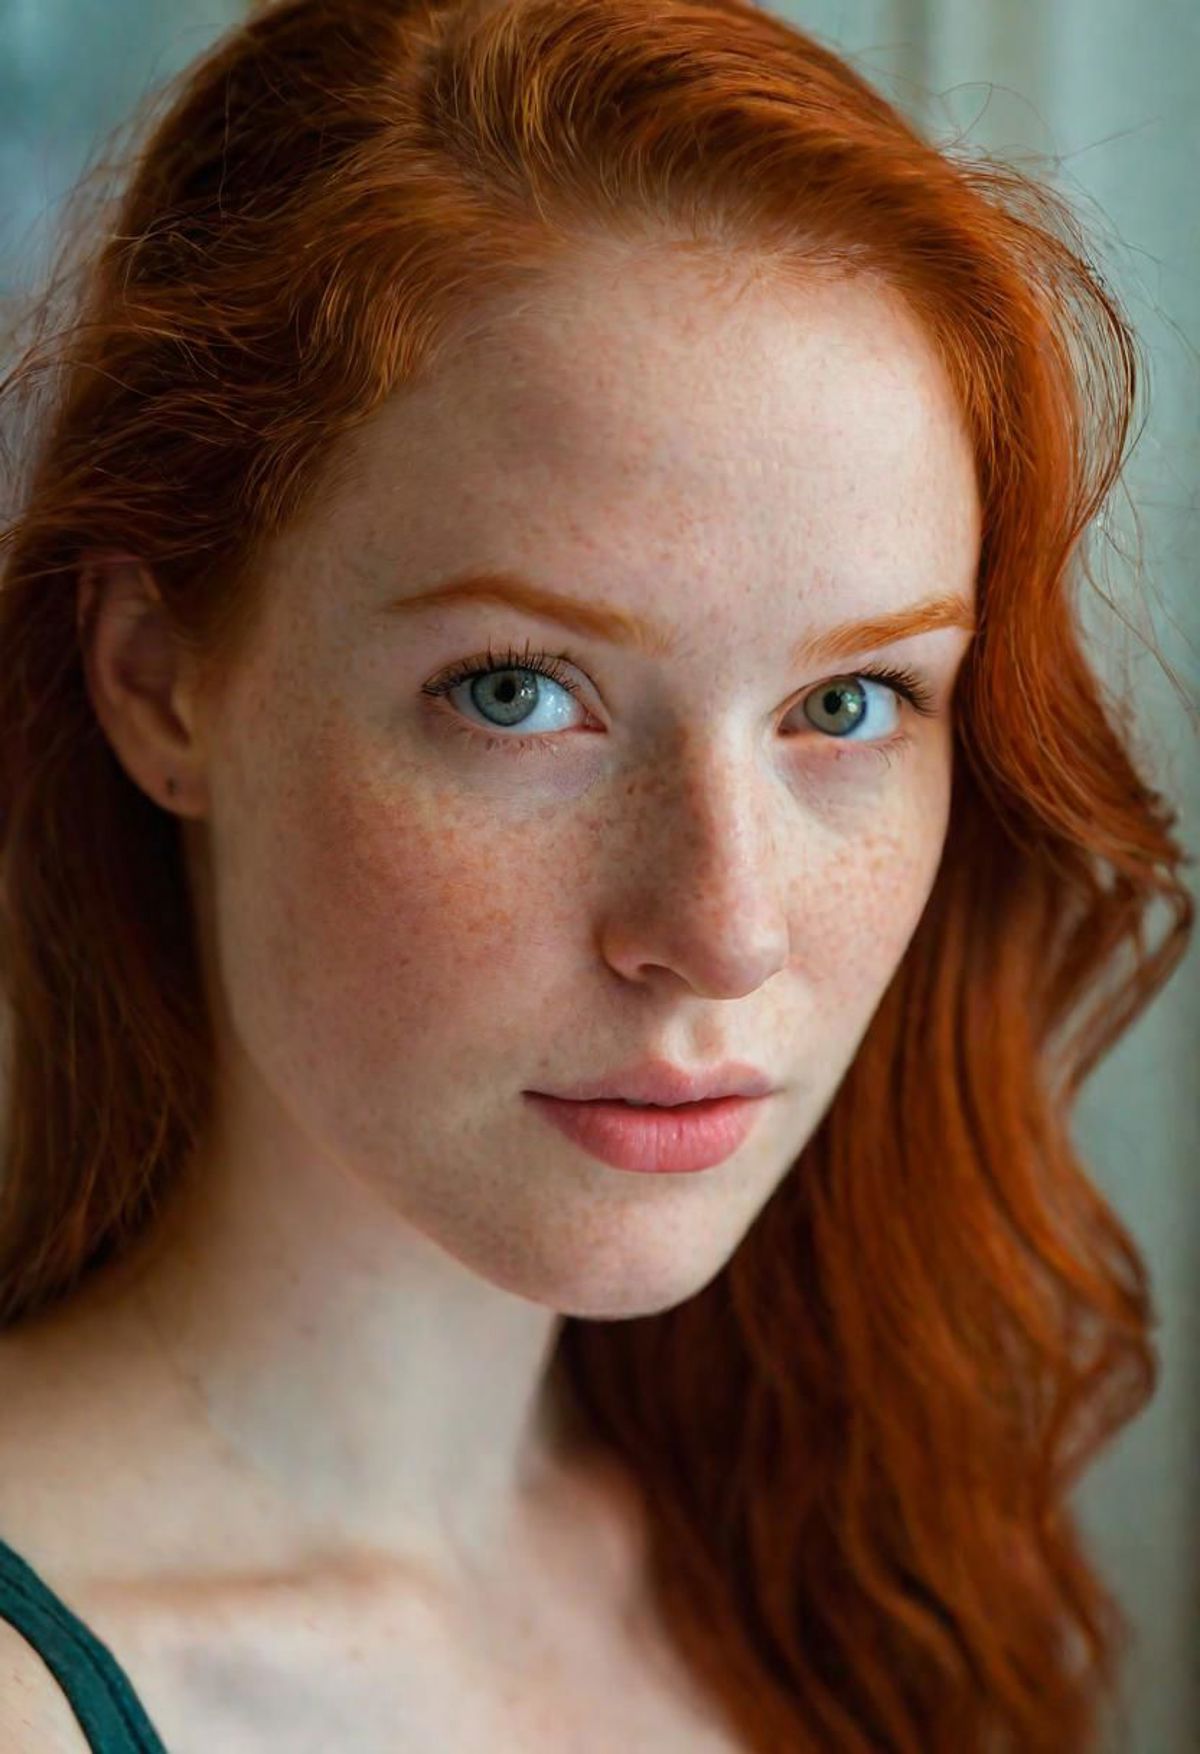 Woman with Red Hair and Freckles Looking at the Camera